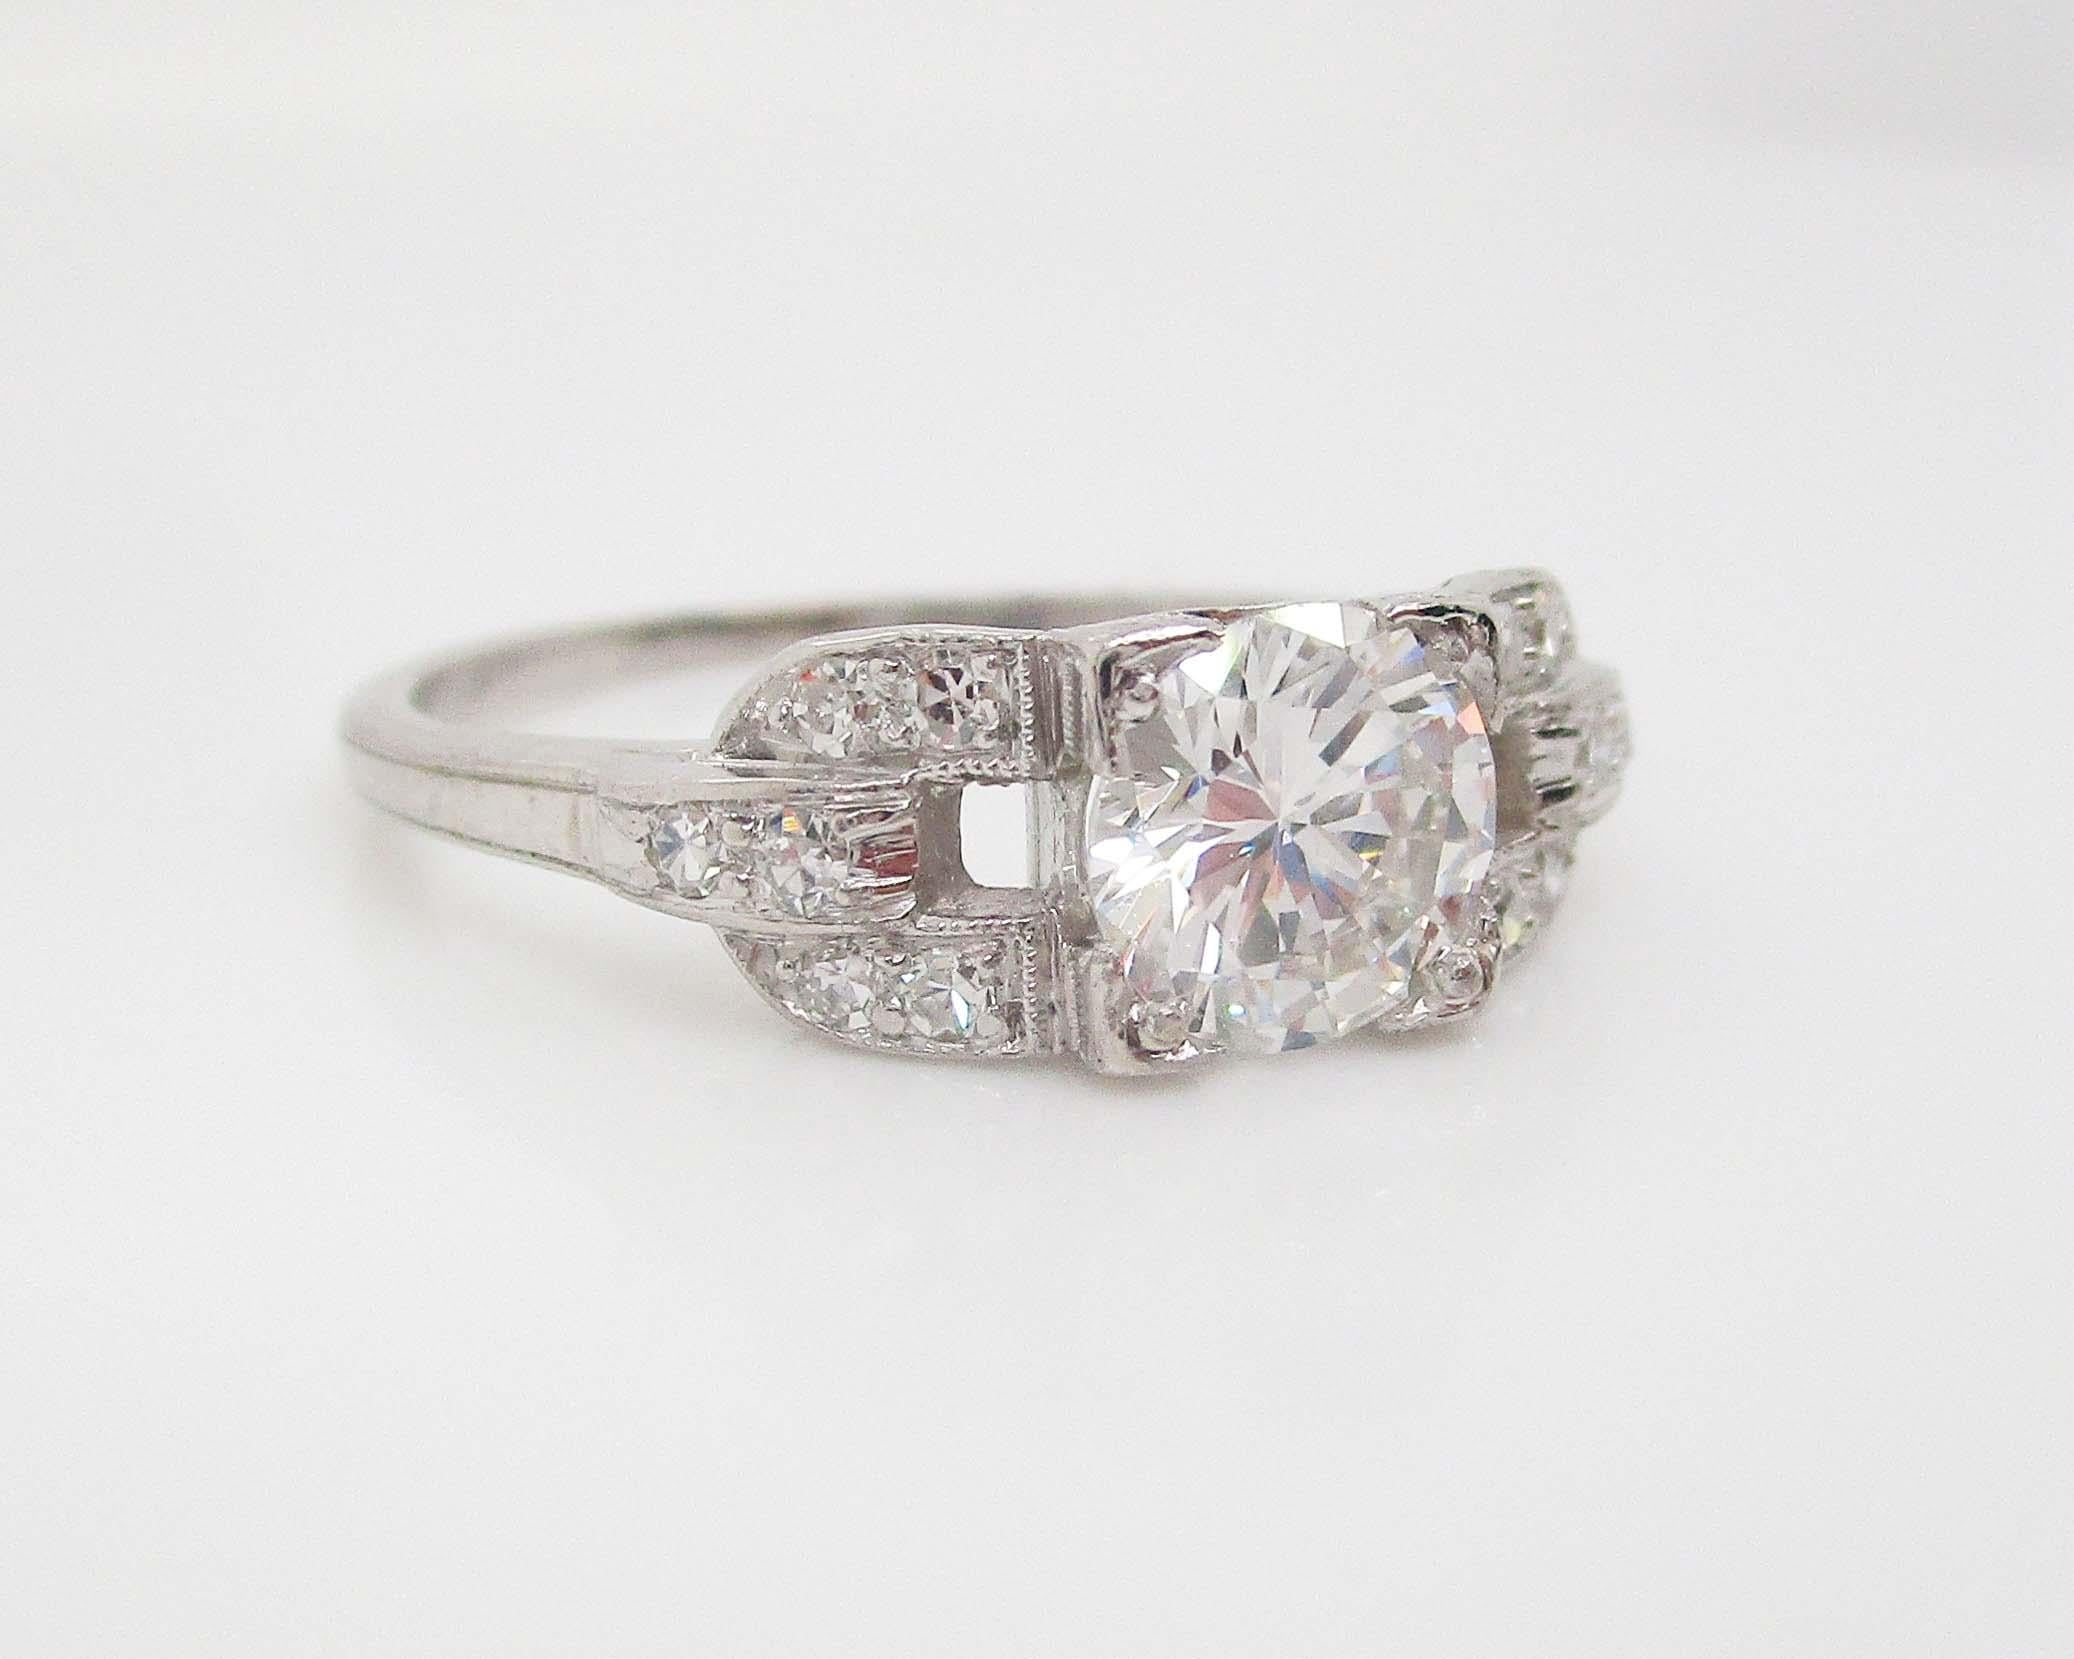 Women's 1920's Deco European Cut Diamond Engagement Ring with GIA Report For Sale